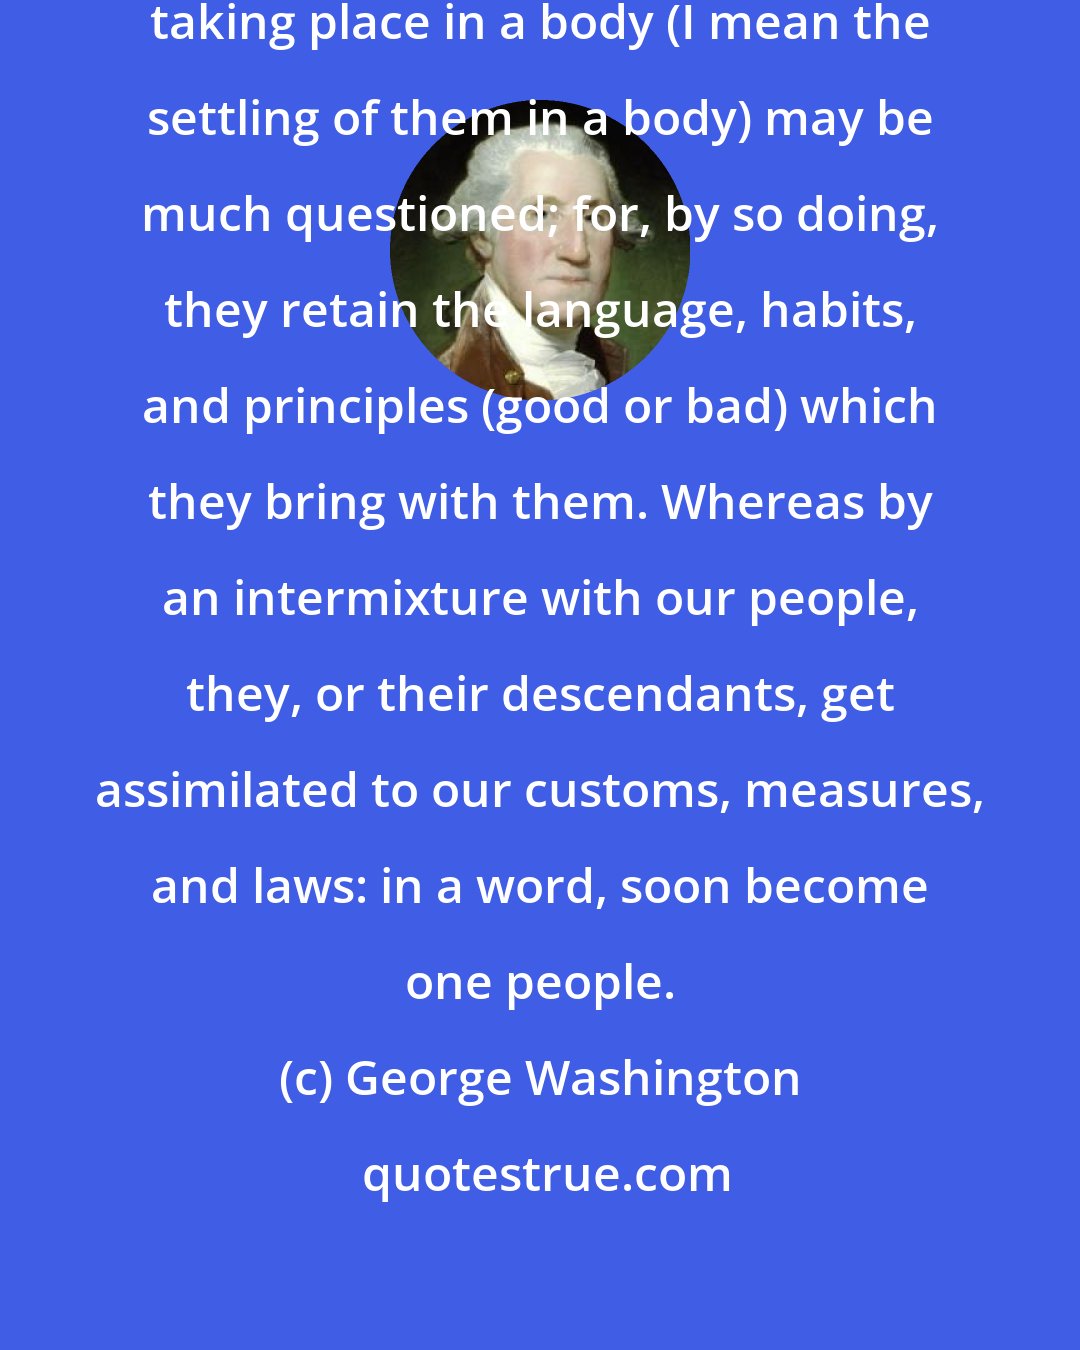 George Washington: The policy or advantage of [immigration] taking place in a body (I mean the settling of them in a body) may be much questioned; for, by so doing, they retain the language, habits, and principles (good or bad) which they bring with them. Whereas by an intermixture with our people, they, or their descendants, get assimilated to our customs, measures, and laws: in a word, soon become one people.